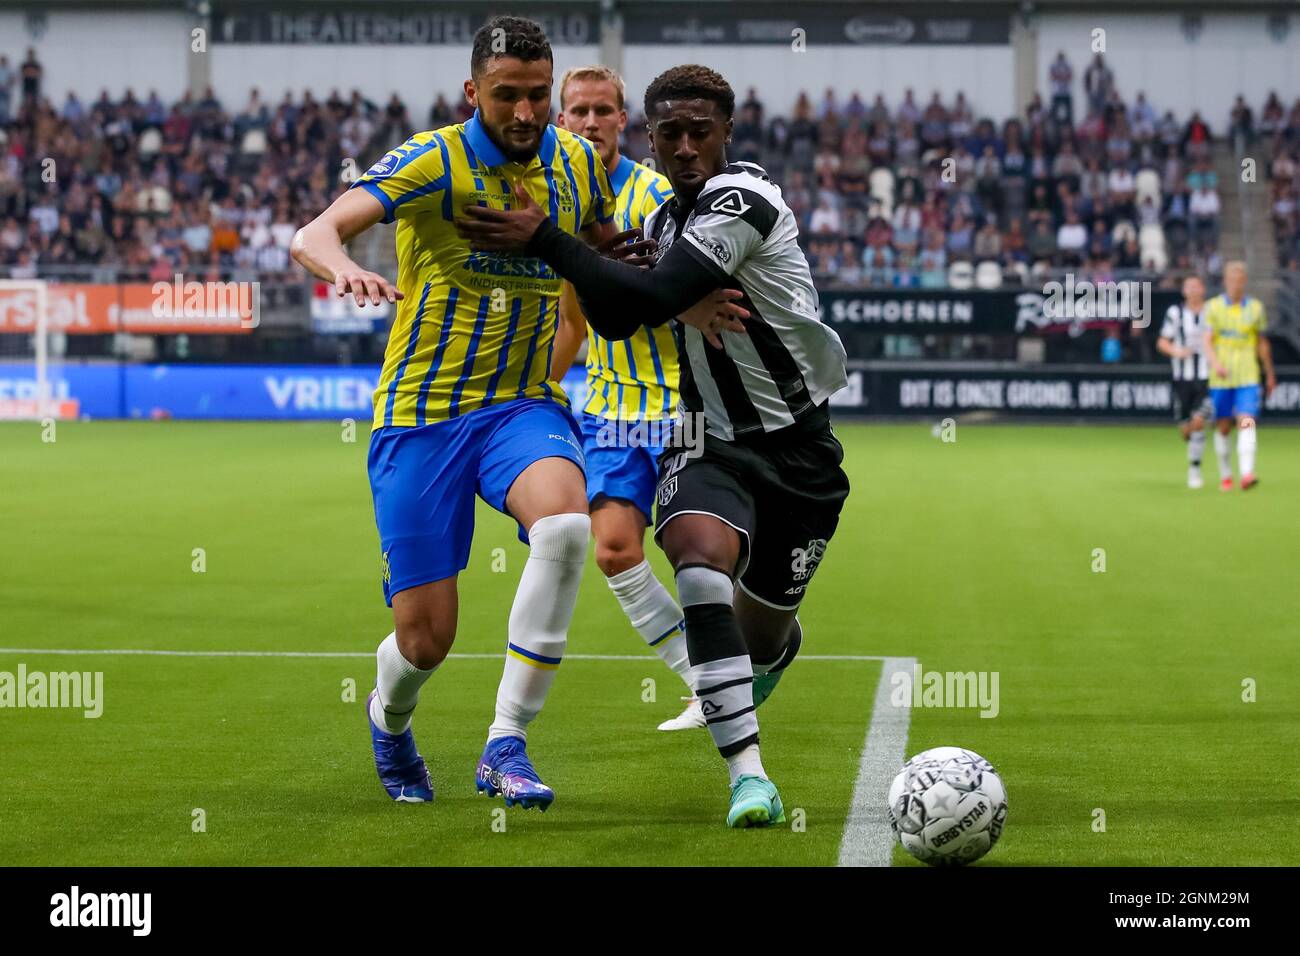 ALMELO, NETHERLANDS - SEPTEMBER 26: Ahmed Touba of RKC Waalwijk and Mohamed  Amissi of Heracles Almelo during the Dutch Eredivisie match between  Heracles Almelo and RKC Waalwijk at the Erve Asito on